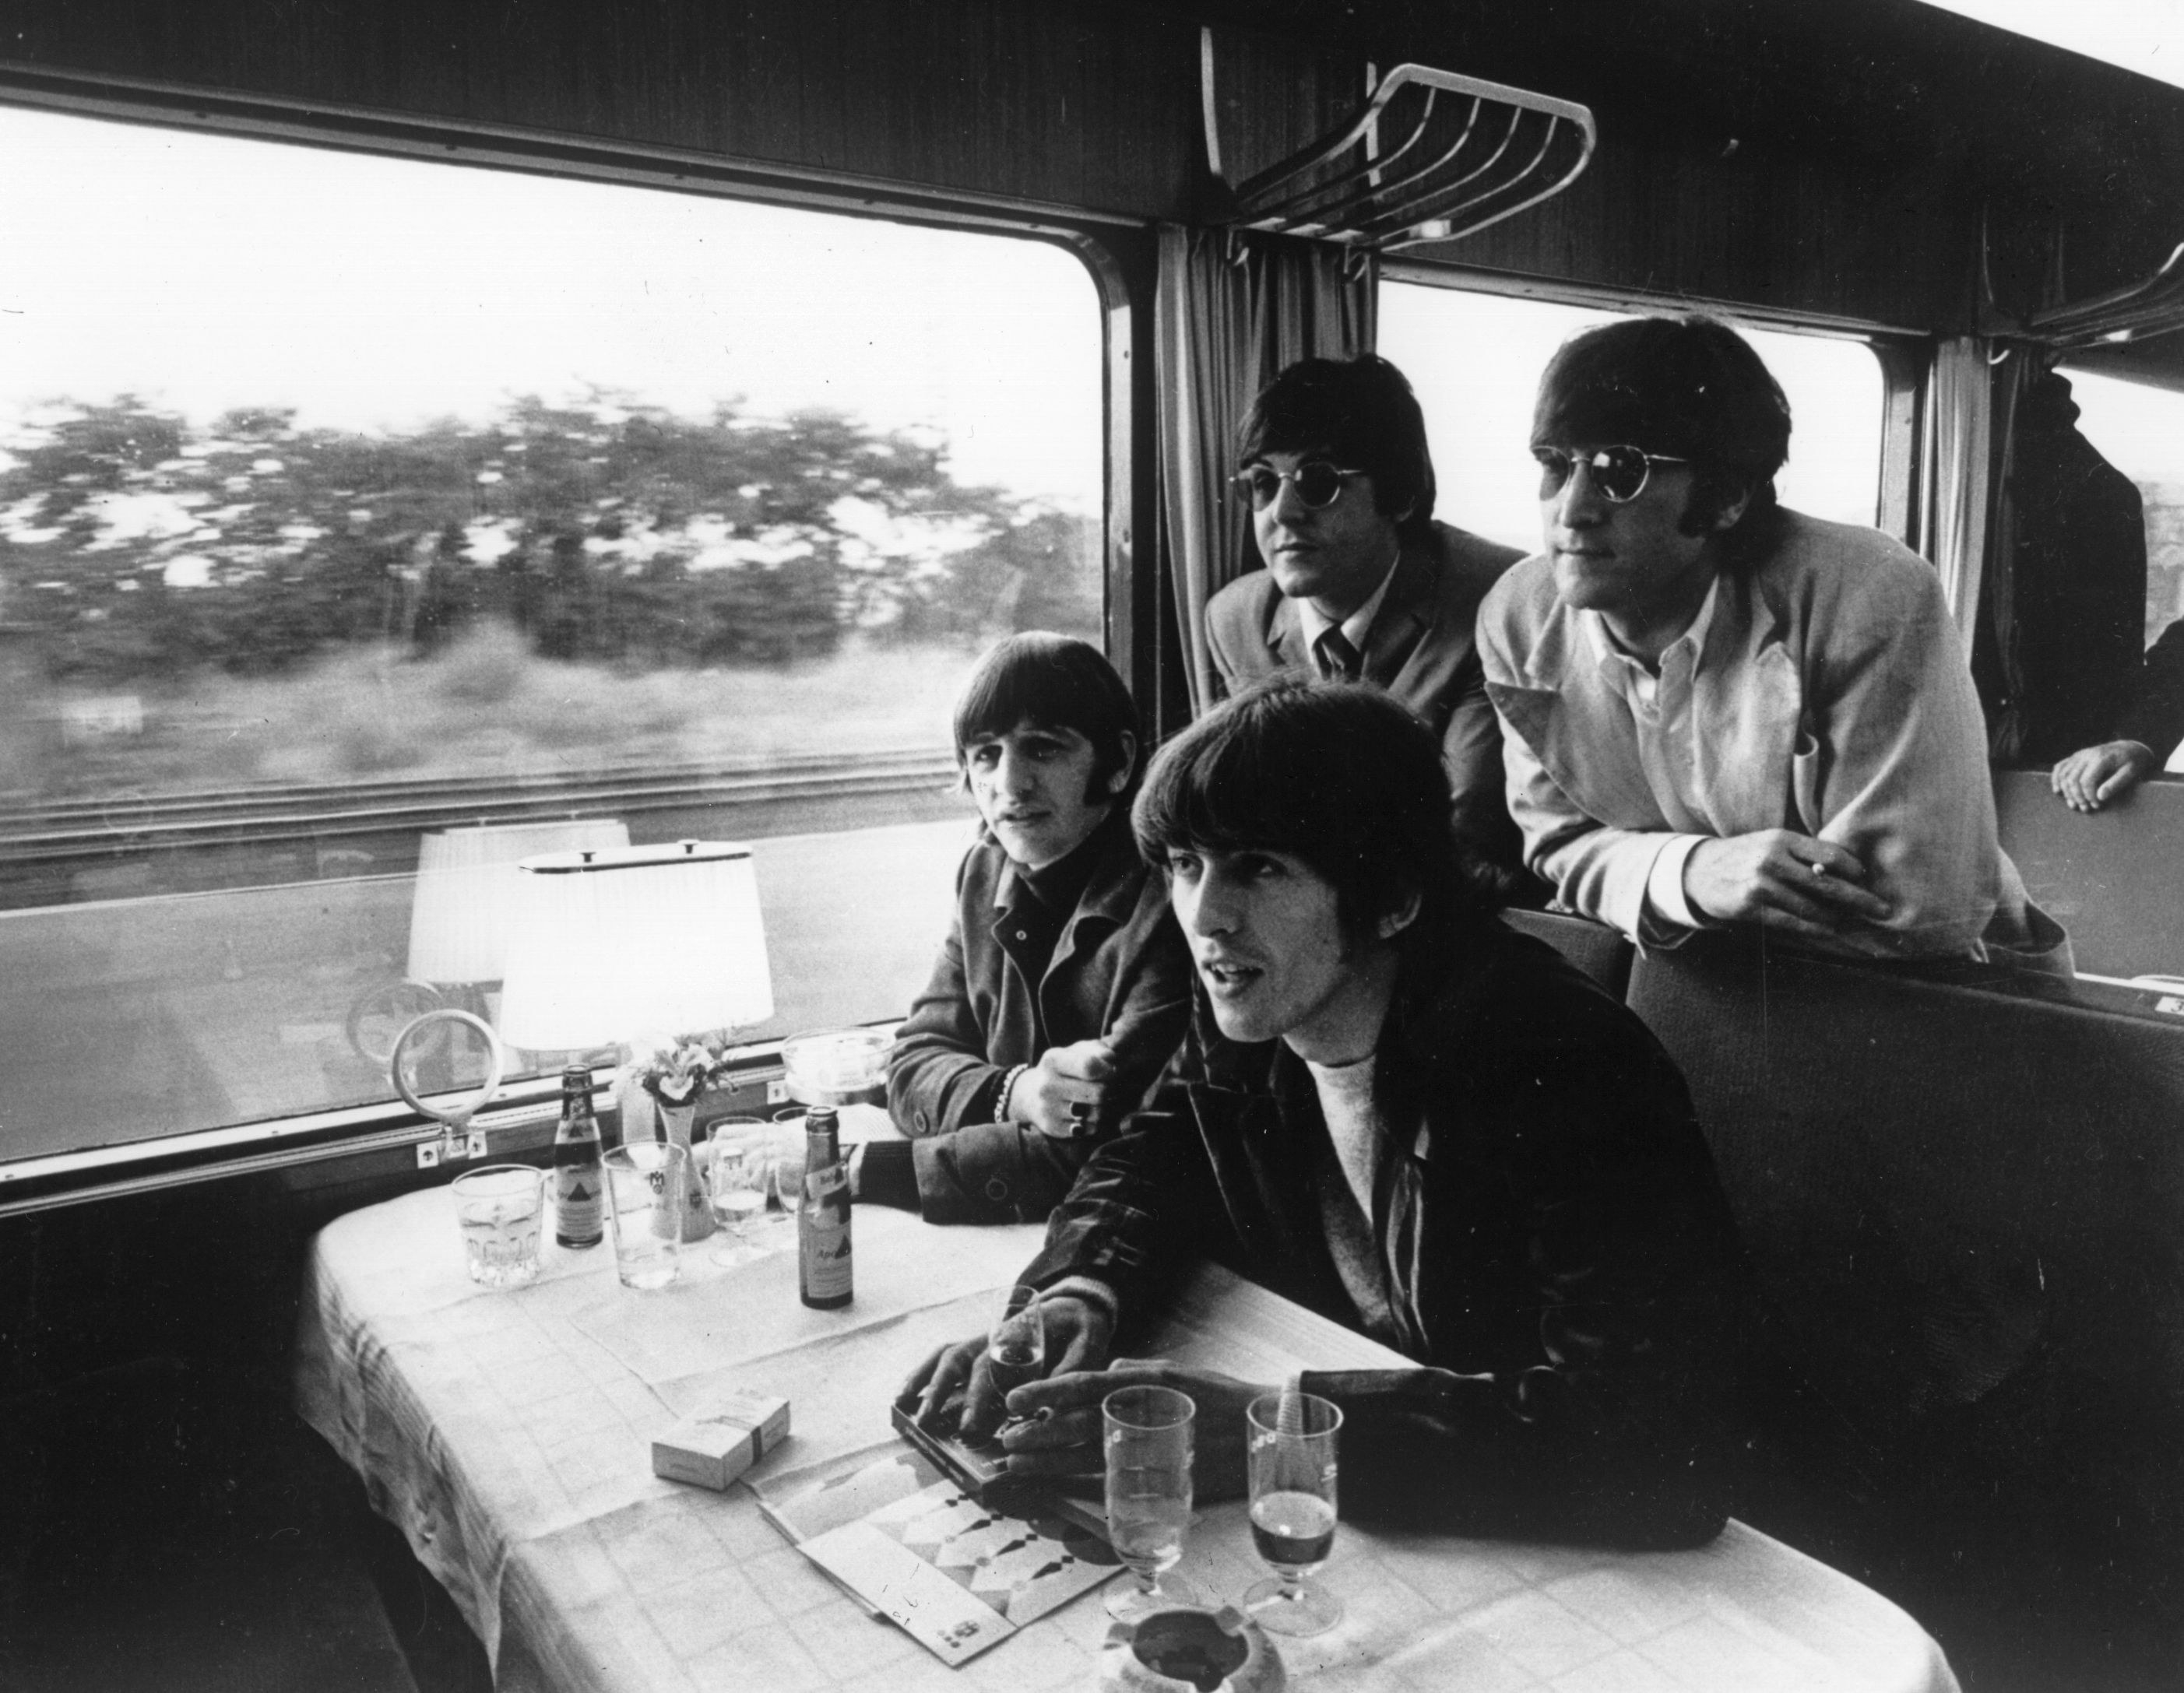 The Beatles on a train in one booth, with glasses beer and cigarettes on the table as the landscape goes by